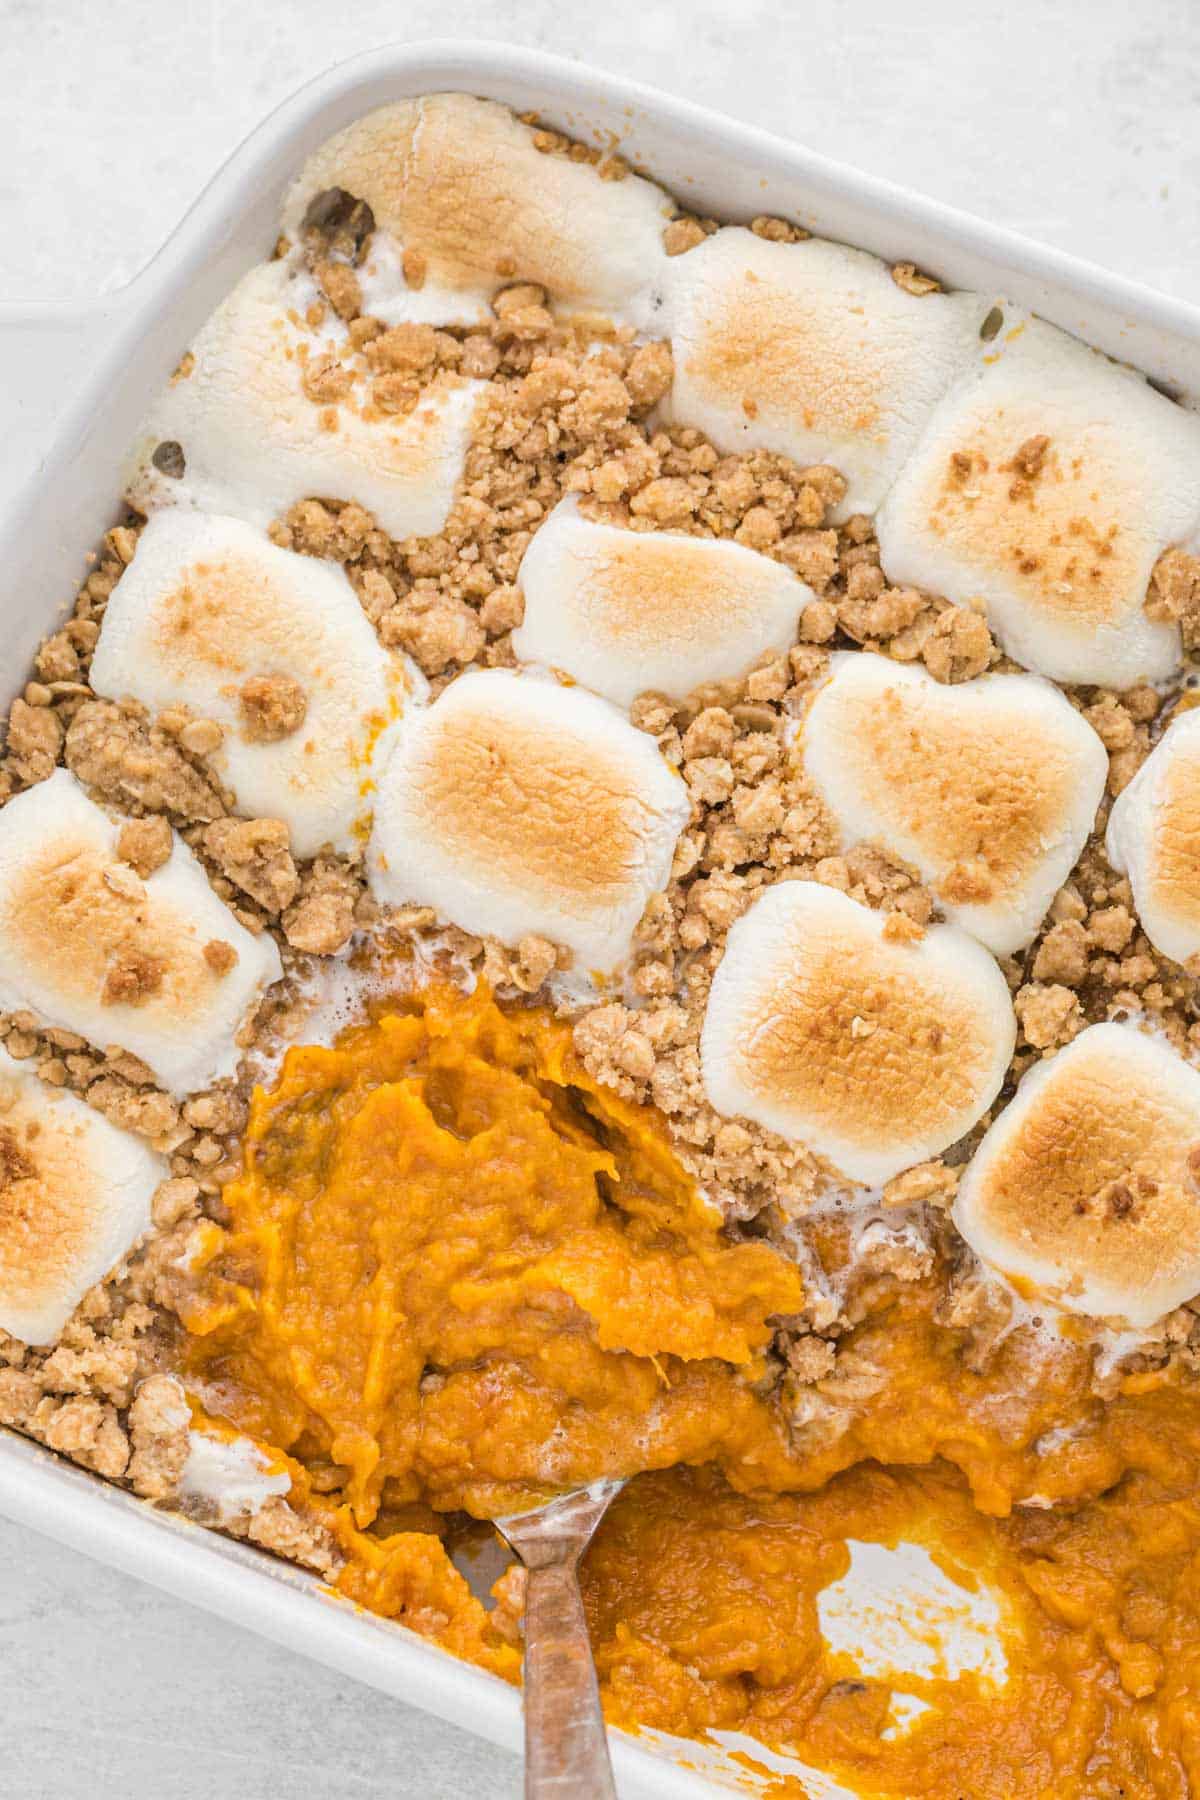 Southern sweet potato casserole recipe on the table with a spoon scooping a serving.